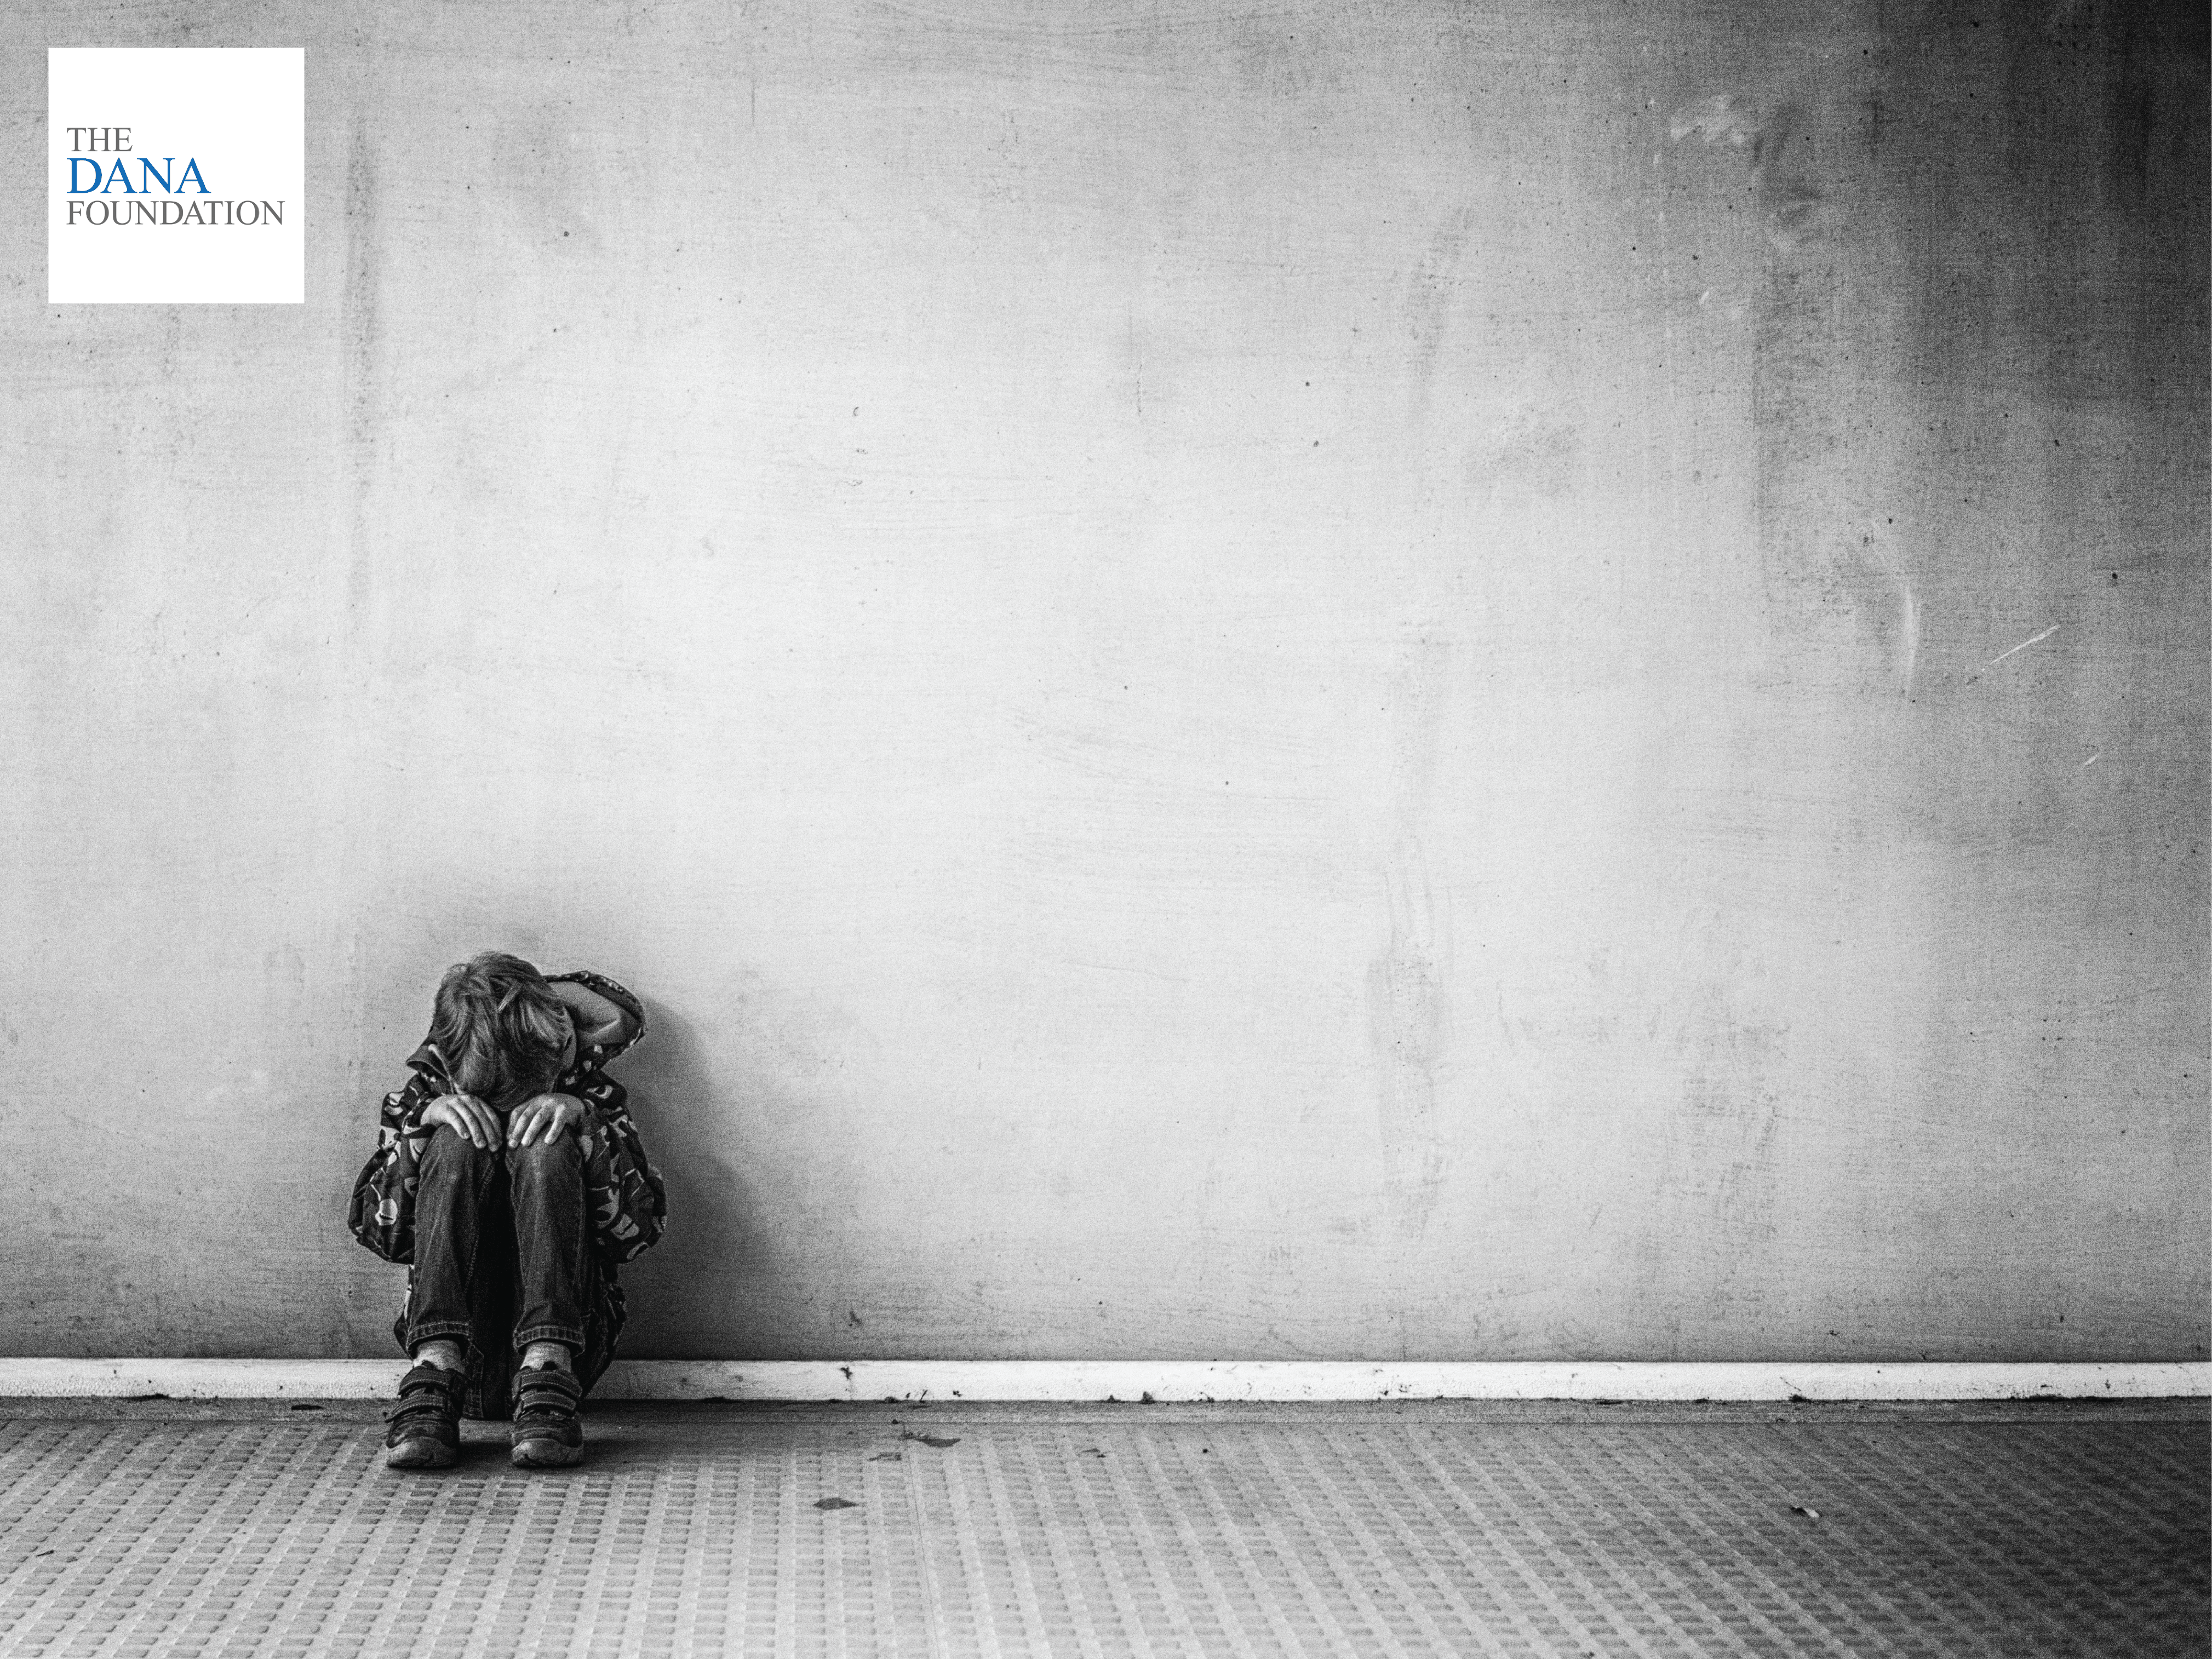 A small boy is crouched down in front of gray wall